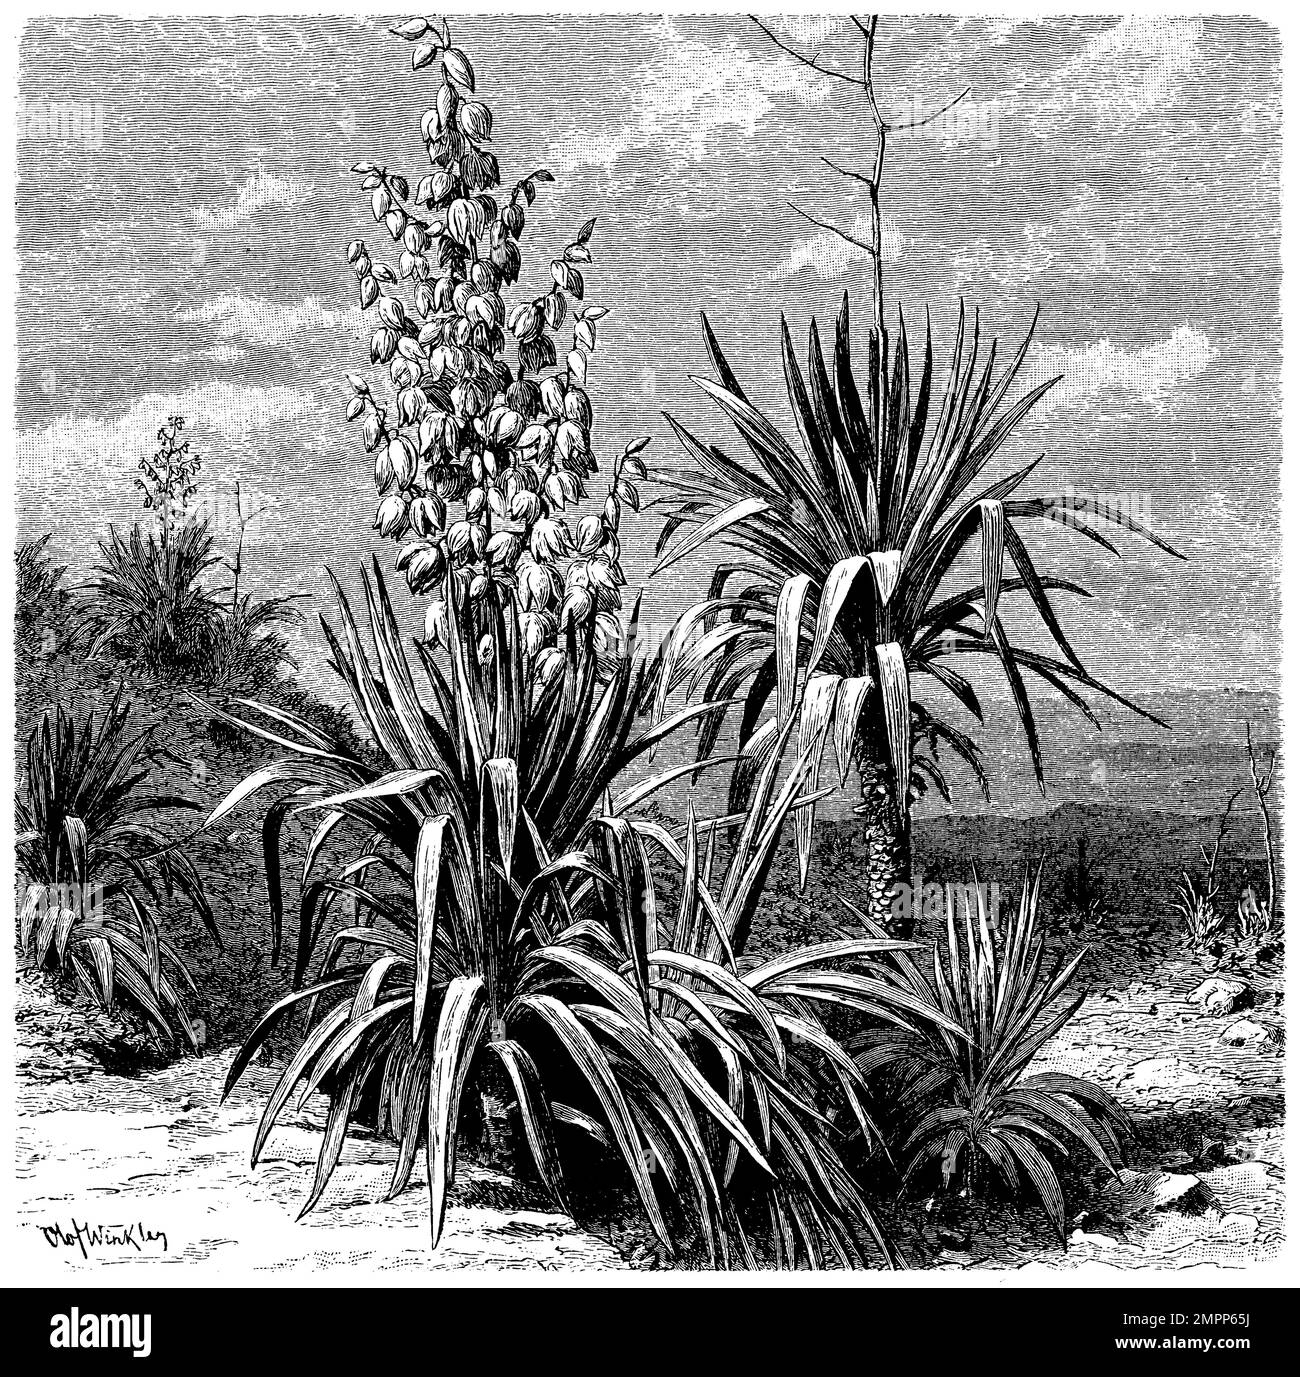 moundlily yucca in the mexican highlands, Yucca gloriosa, Olof Winkler (botany book, 1899), Kerzen-Palmlilie im mexikanischen Hochland, Yucca superbe sur les hauts plateaux mexicains Stock Photo